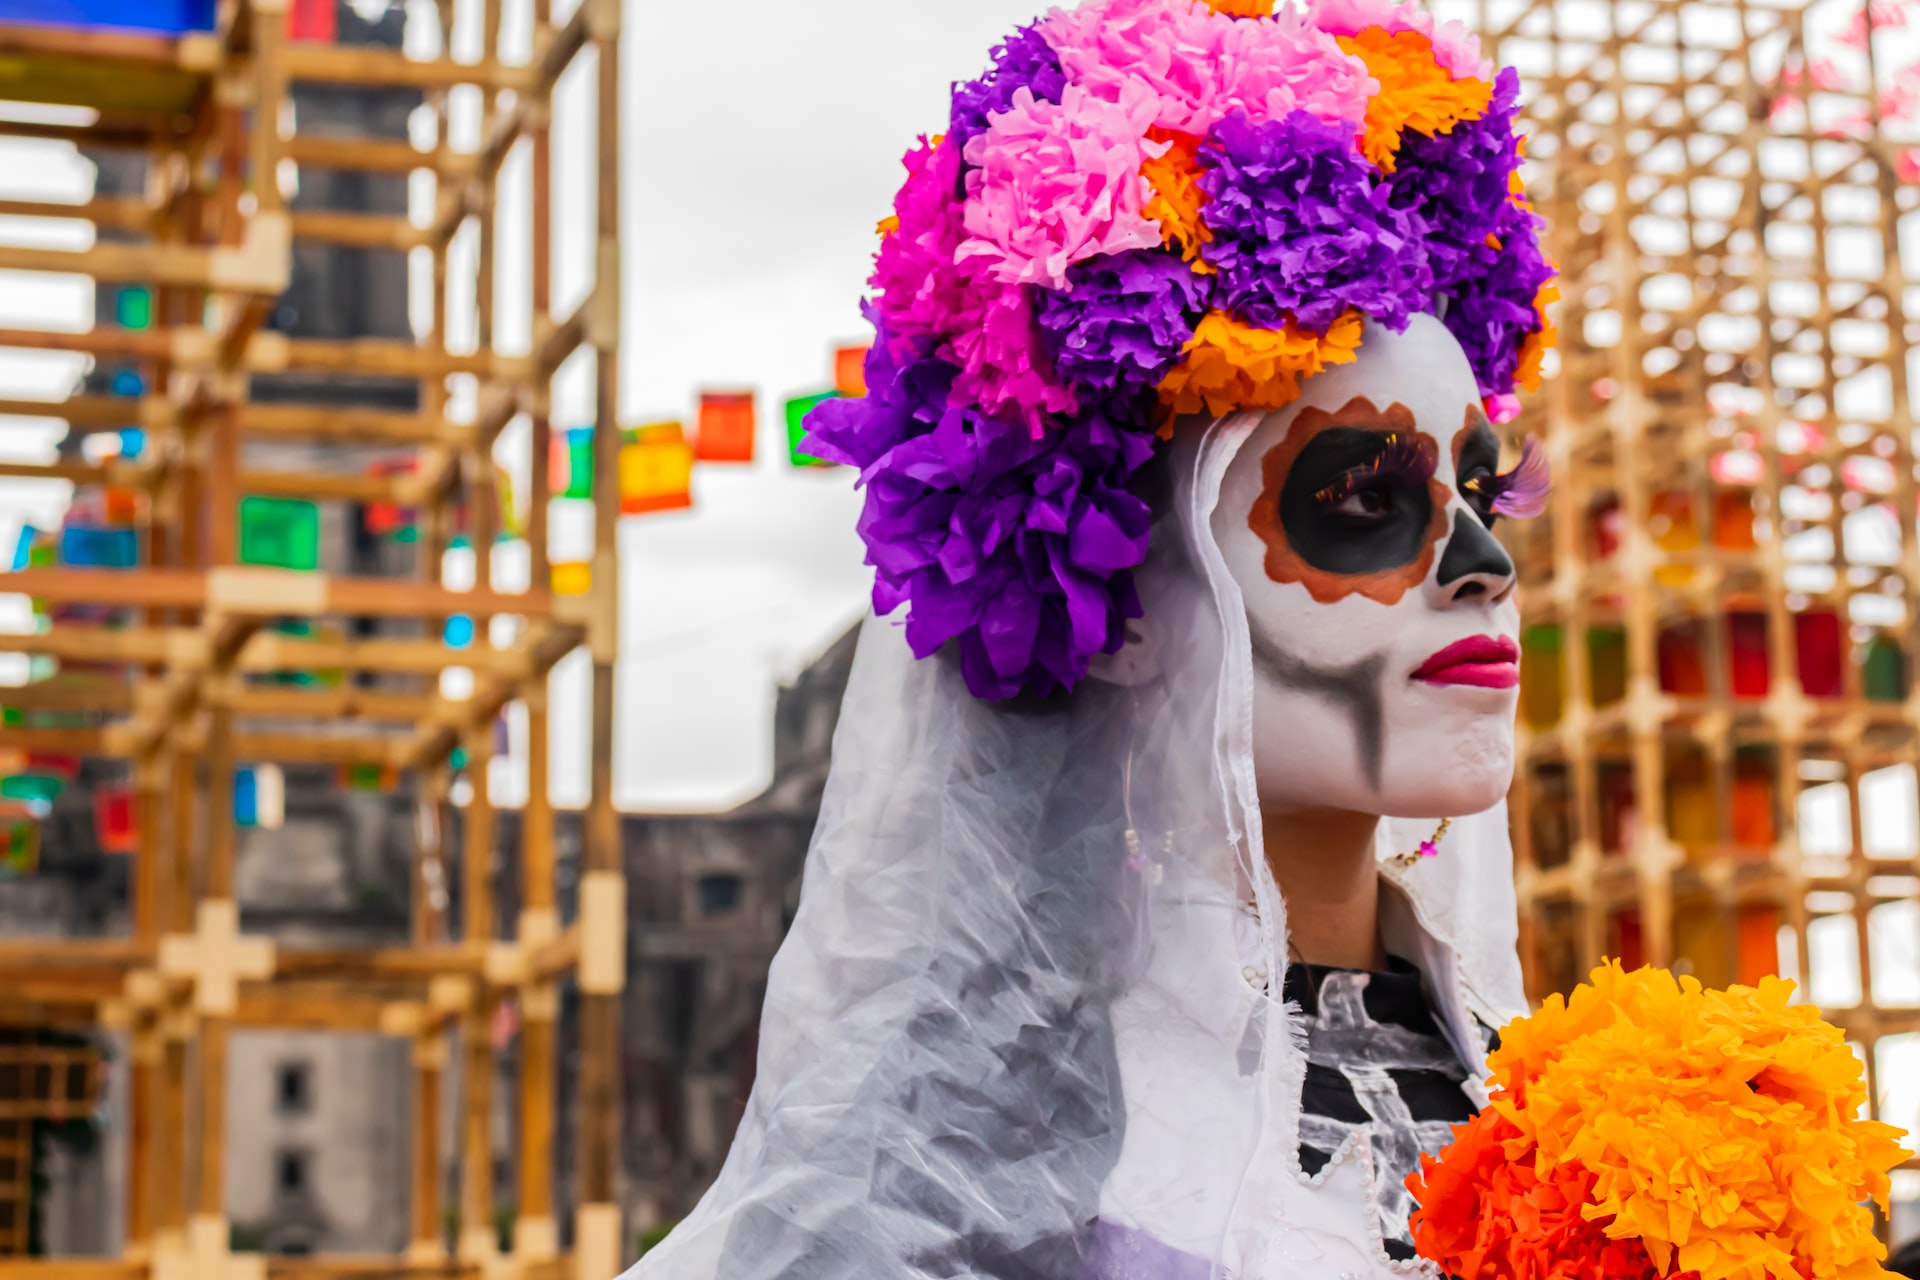 See the Day of the Dead celebration in Mexico, one of the best places to visit for Halloween
